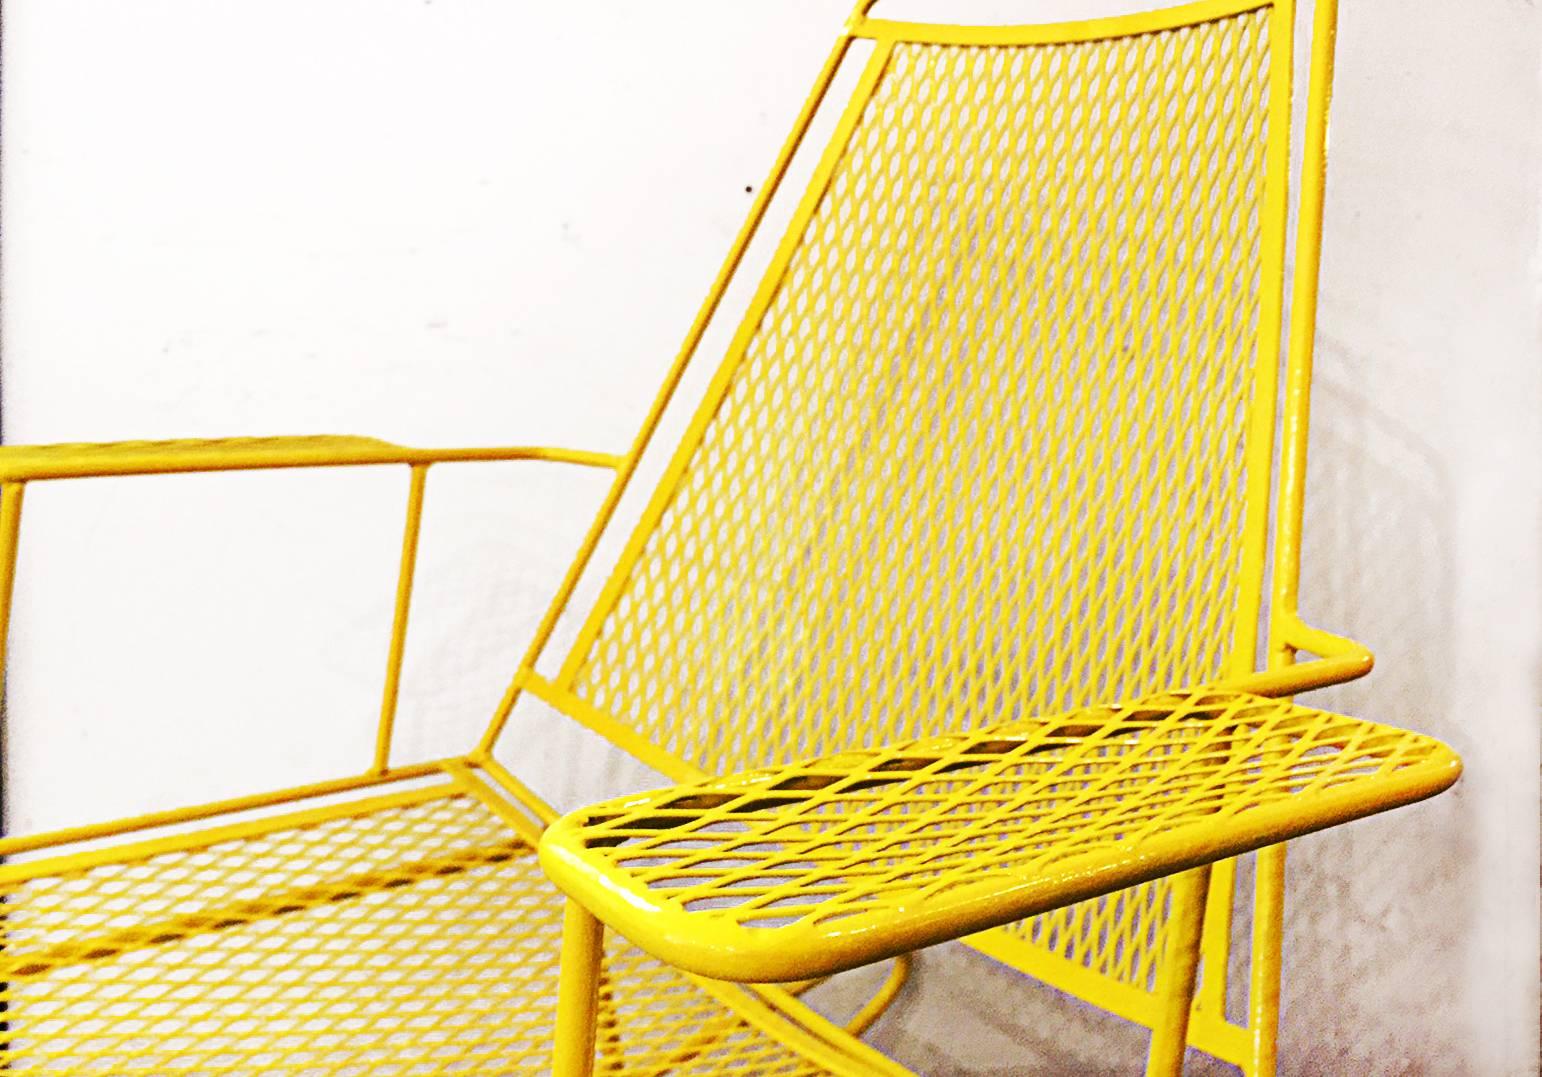 Fantastic expanded metal and solid bar rocking chair in the style of Russell Woodard. Streamline architectural design refinished in bright yellow powder-coat. Can be used indoor or outdoors. Dimensions: 34" D x 29" W x 36" H.